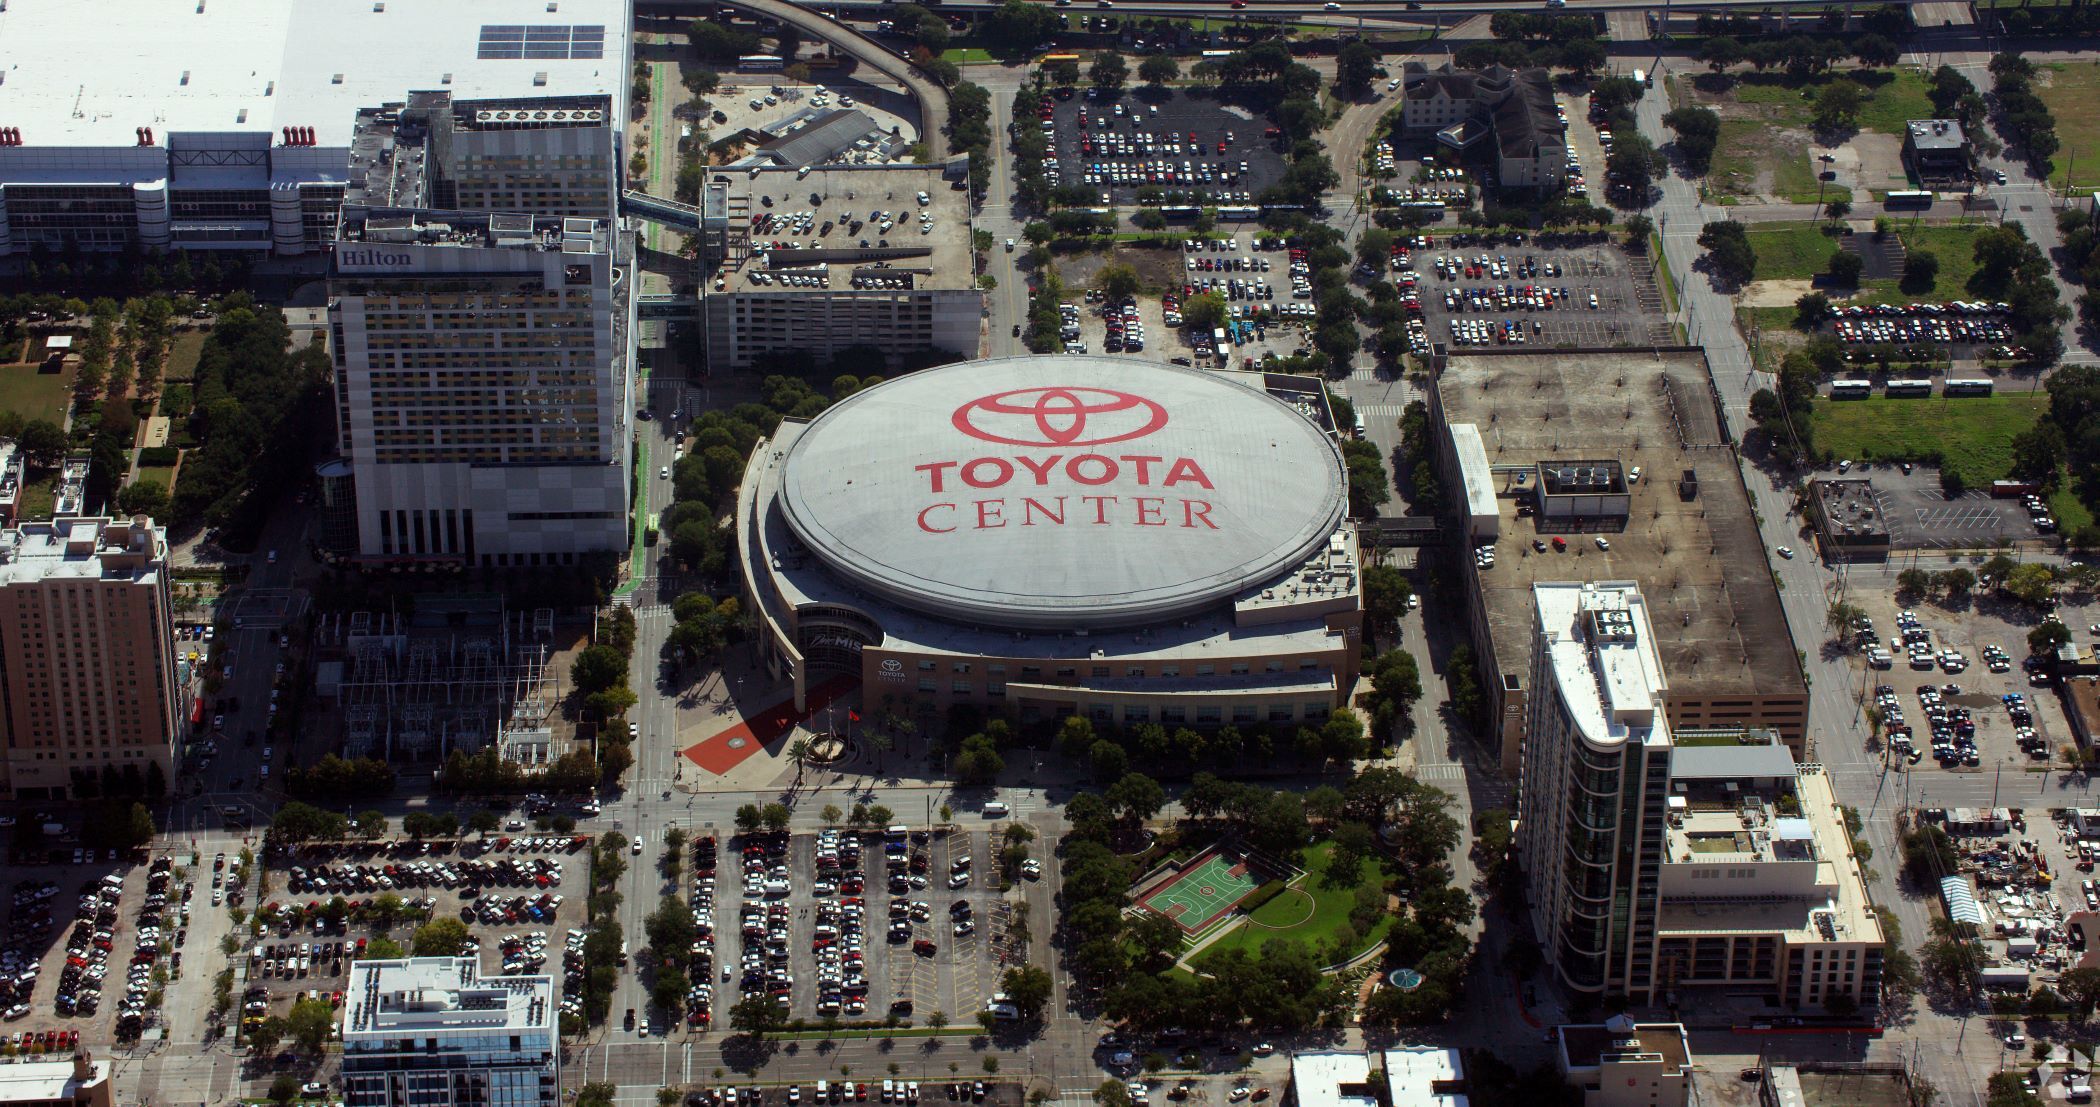 Toyota Center in downtown Houston could be the new home of the Arizona Coyotes, a report says, should the NHL franchise decide to leave metropolitan Phoenix and relocate to the Bayou City. (CoStar)